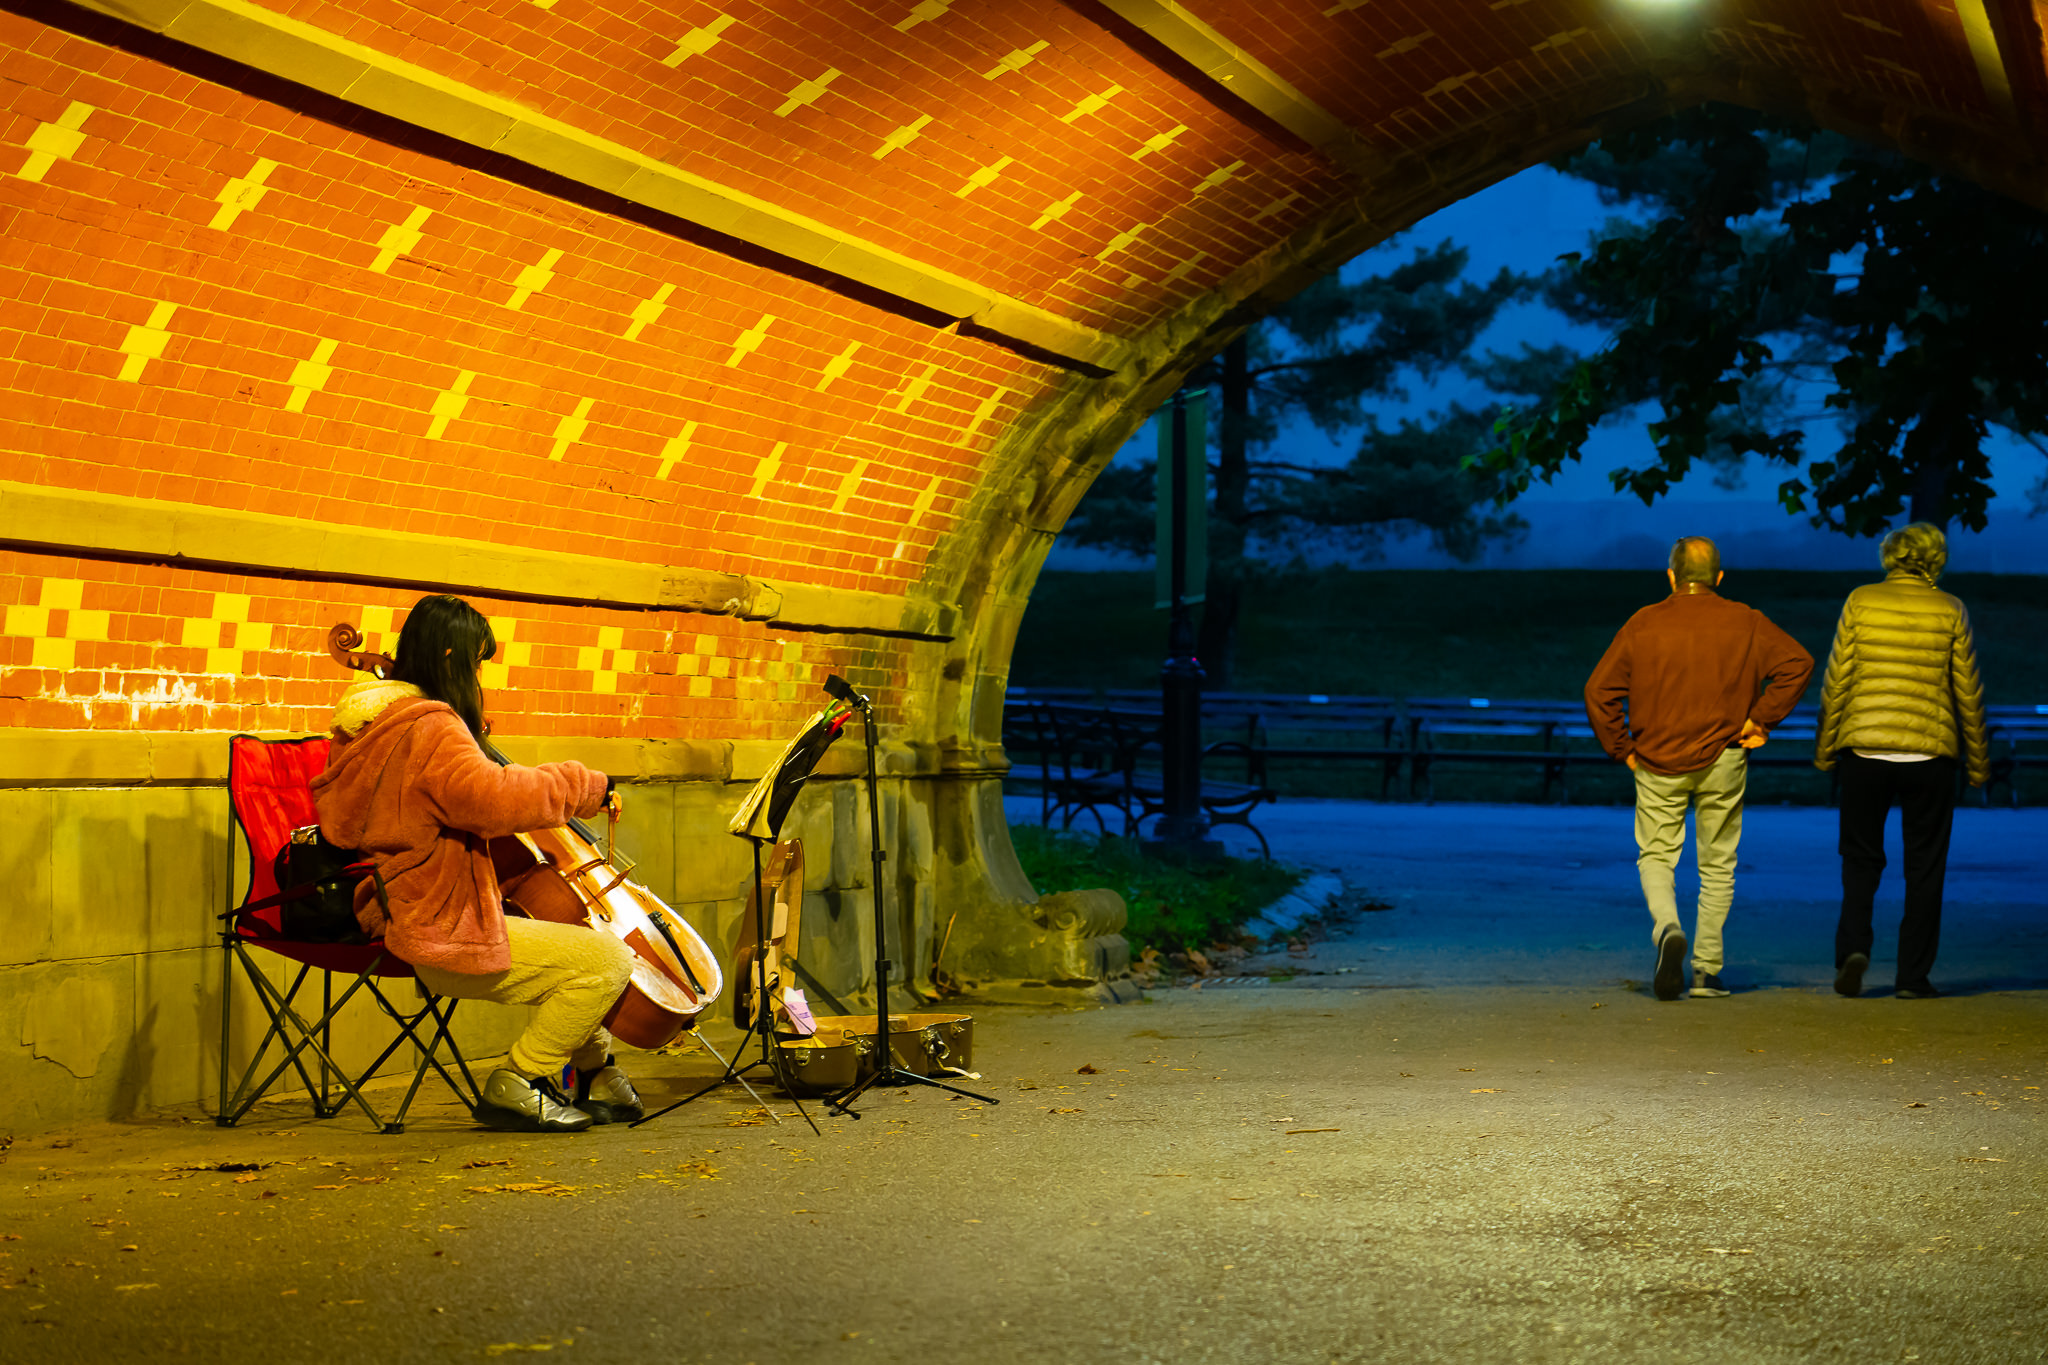 a photo of a cellist playing music in a tunnel in central park new york city